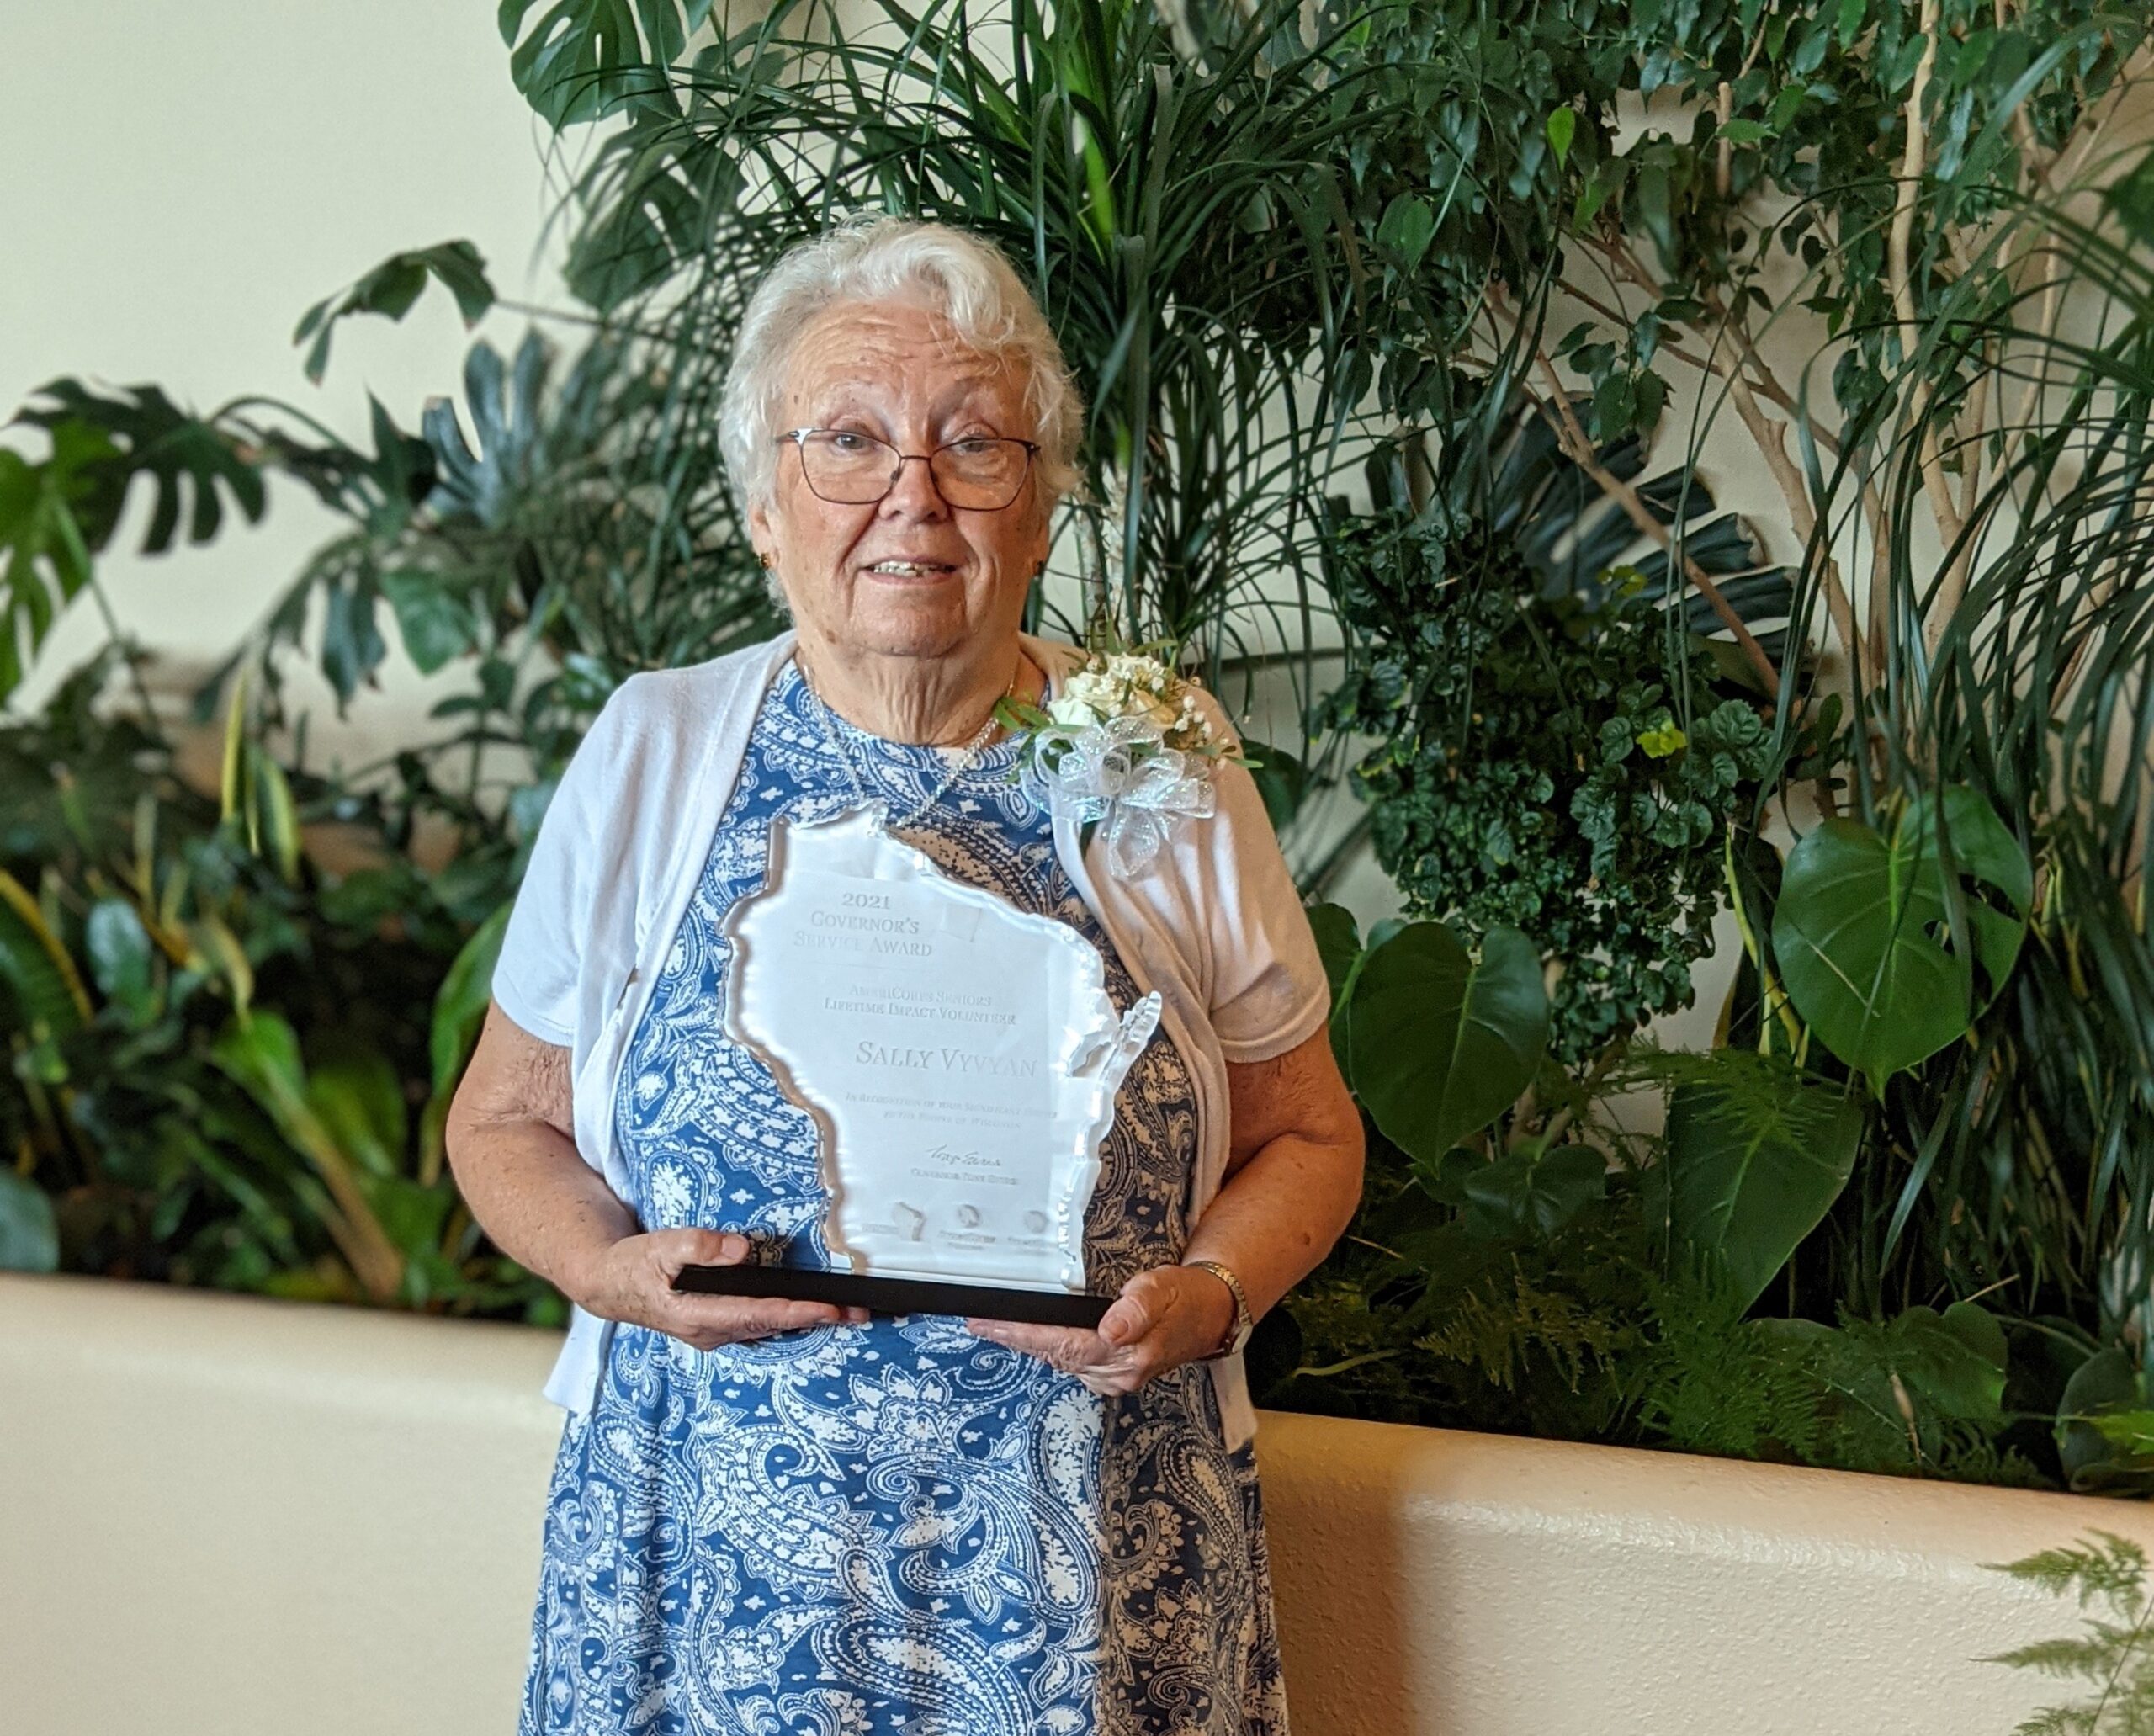 Westby Foster Grandparent Sally Vyvyan poses in Madison with her Governor's Service Award, August 2021; Image courtesy of Southwest Community Action Program.